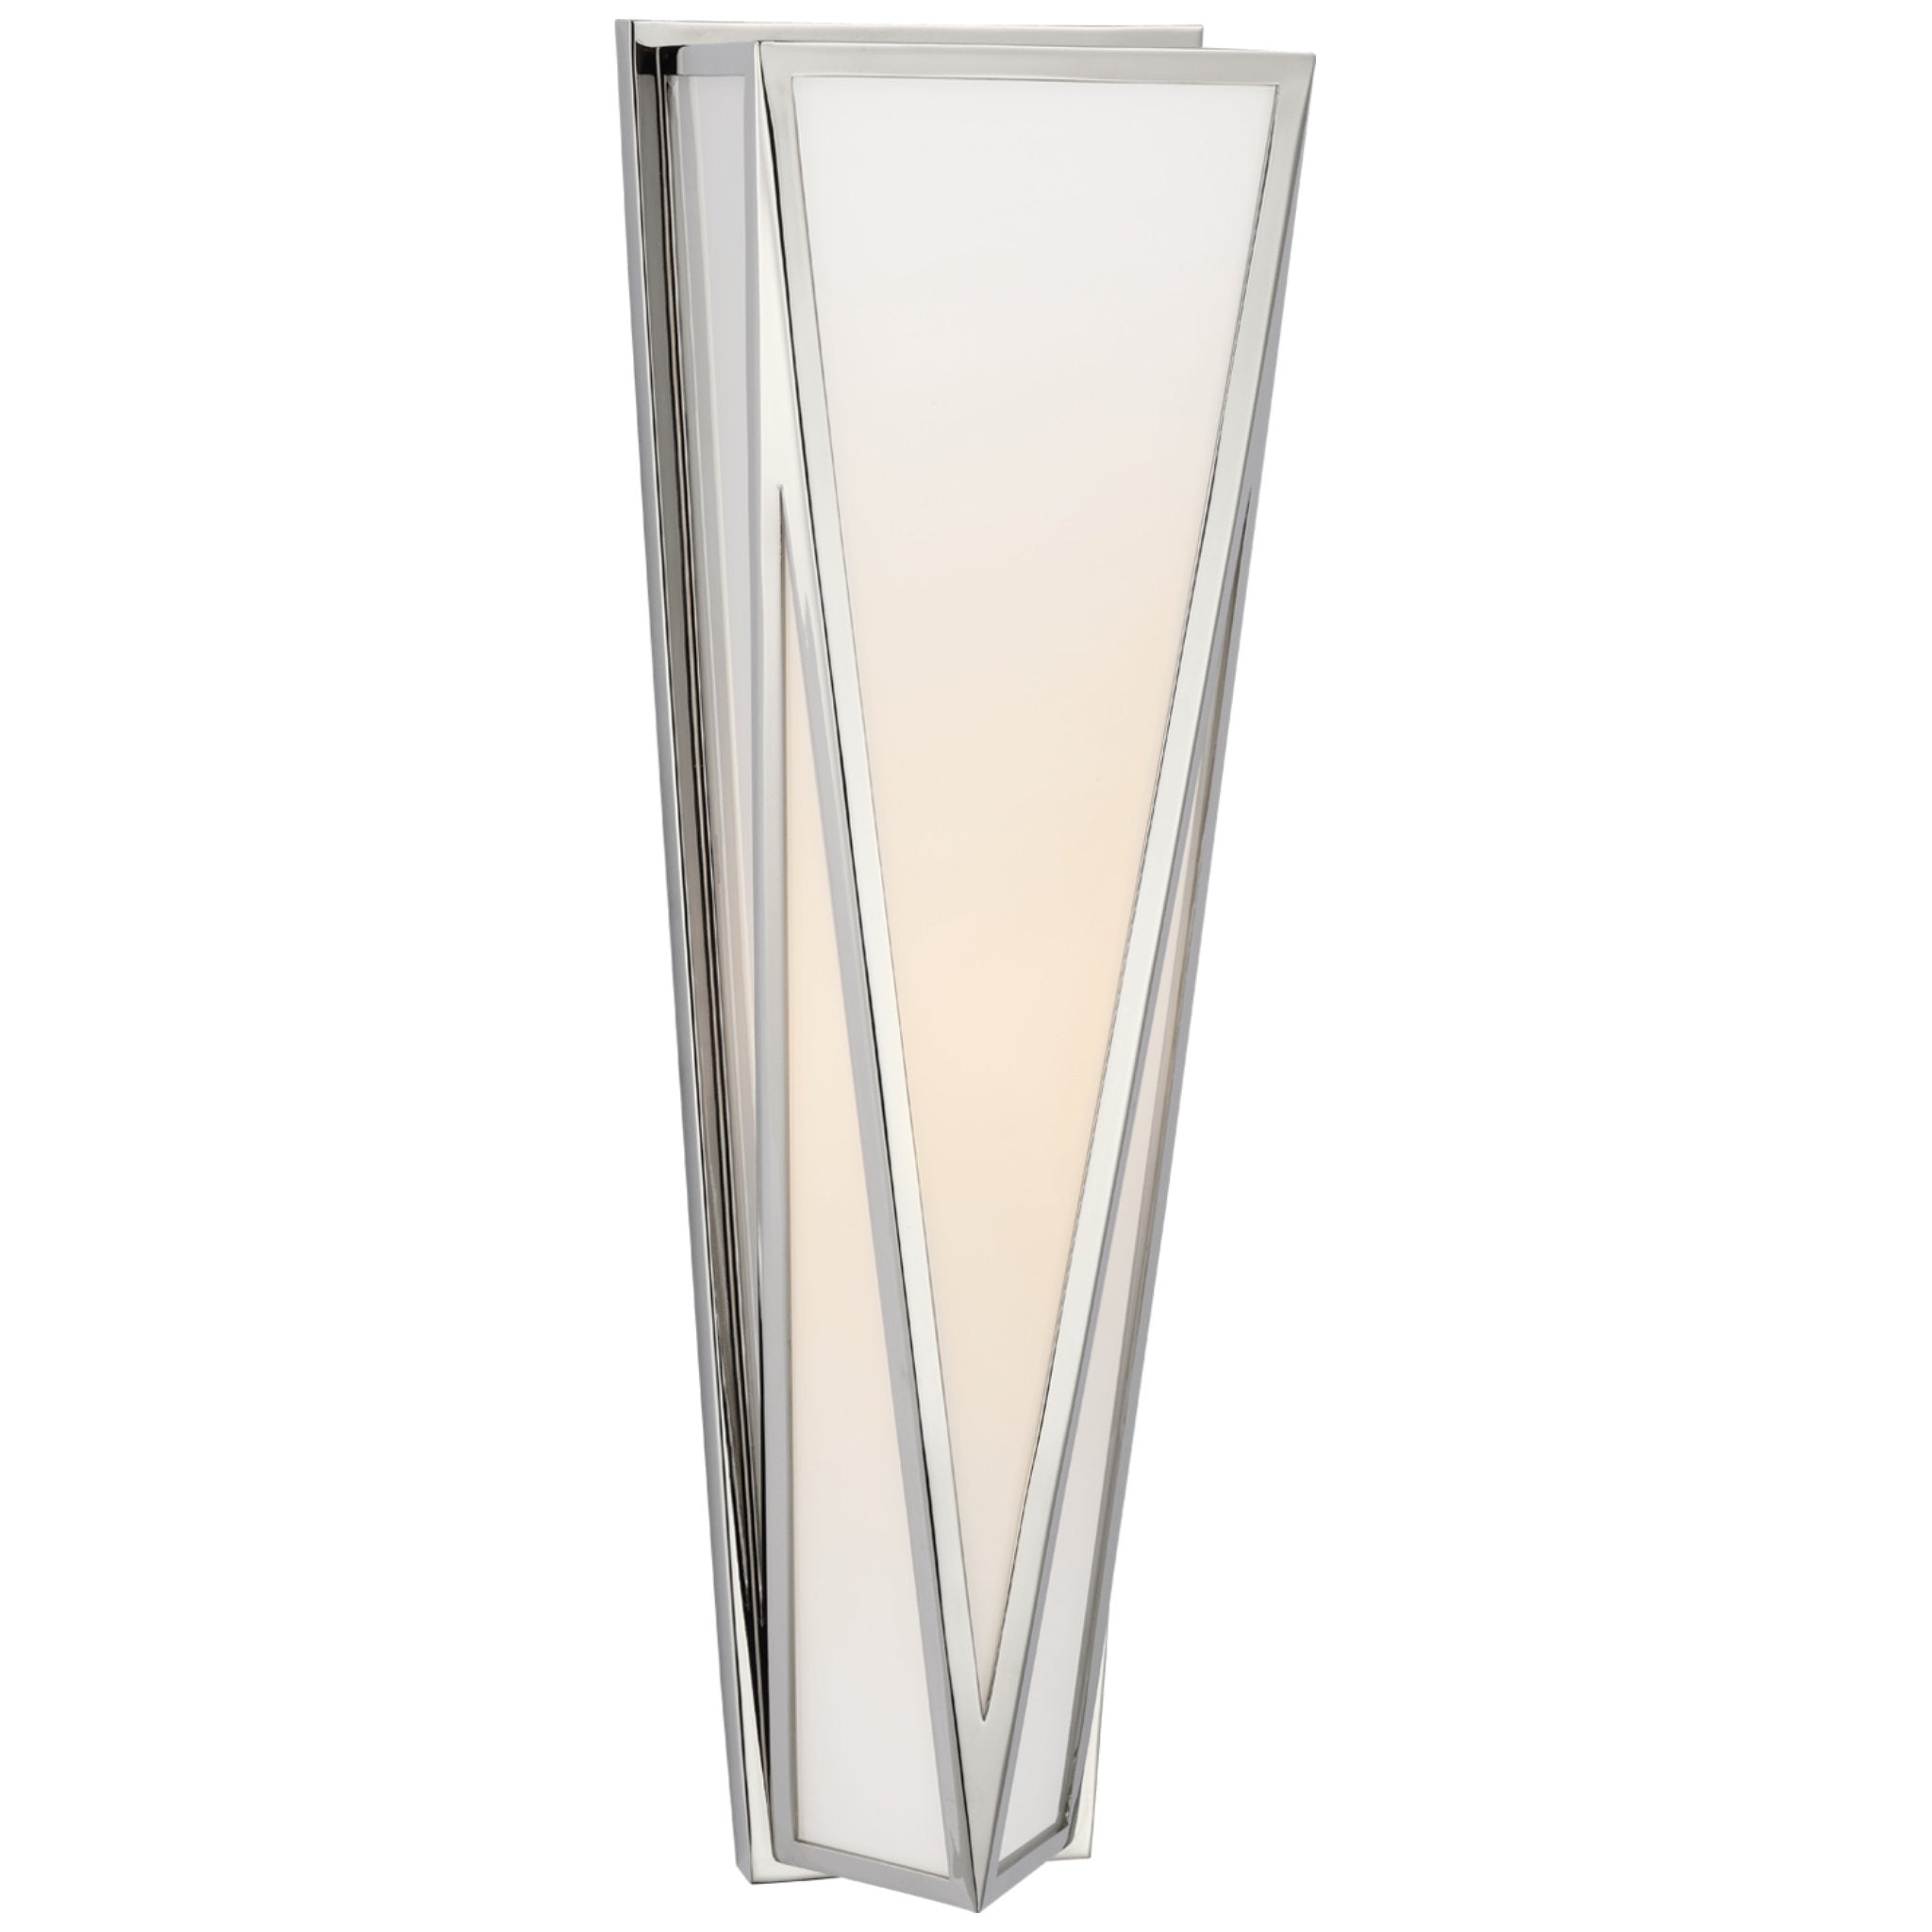 Julie Neill Lorino Medium Sconce in Polished Nickel with White Glass